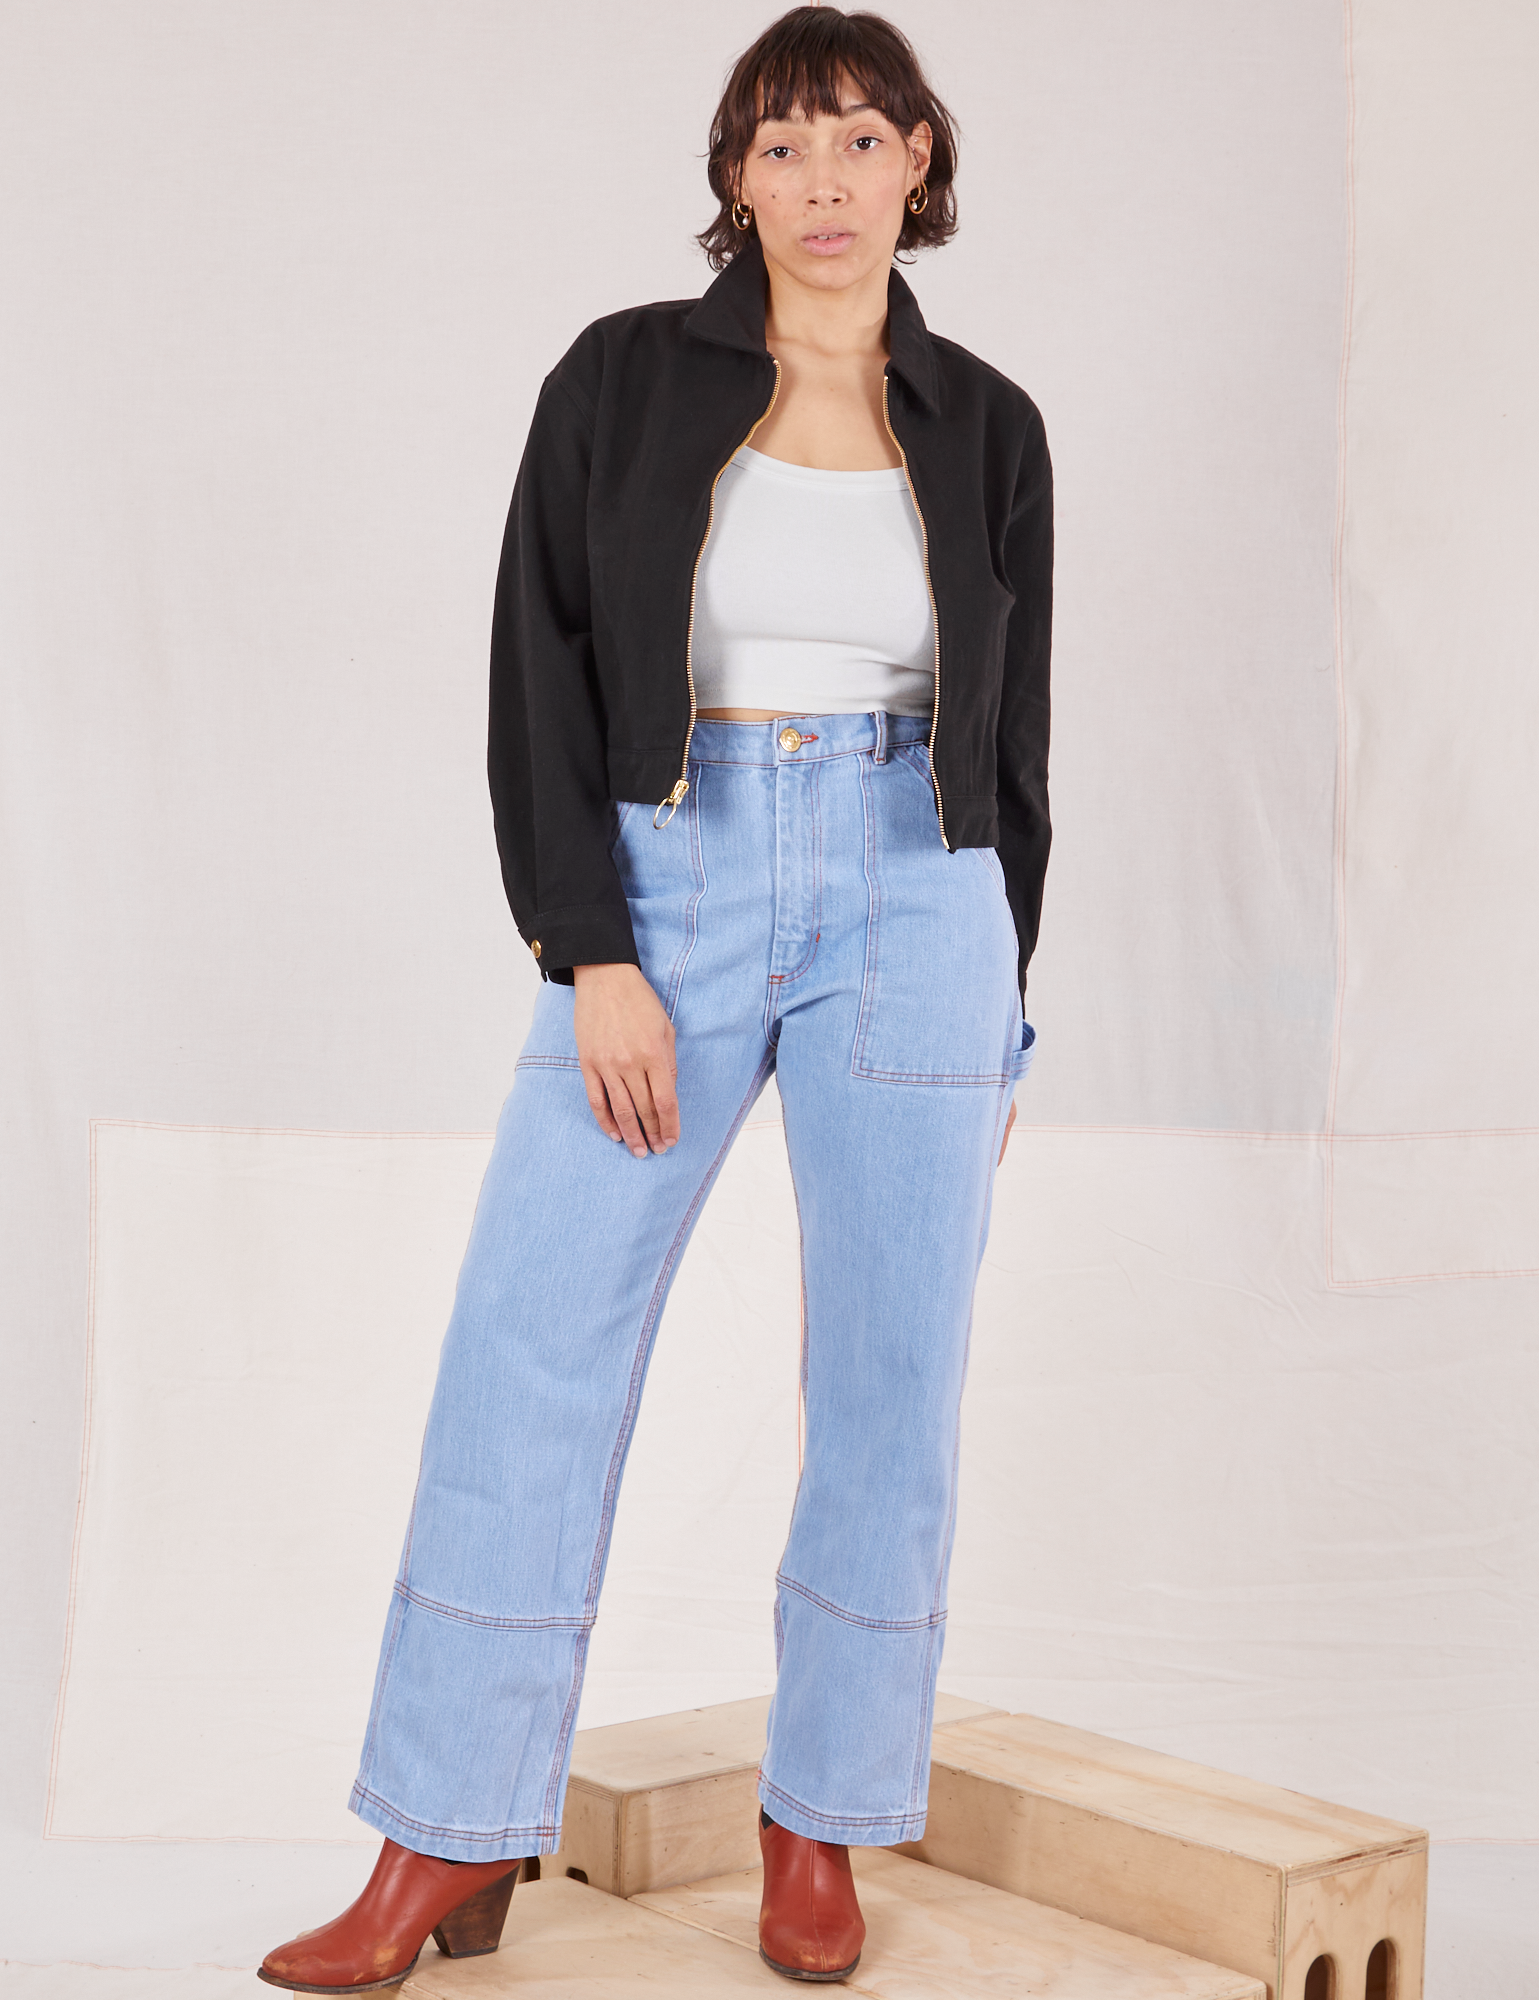 Tiara is wearing Ricky Jacket in Basic Black with a vintage tee off-white Cropped Tank Top and light wash Carpenter Jeans